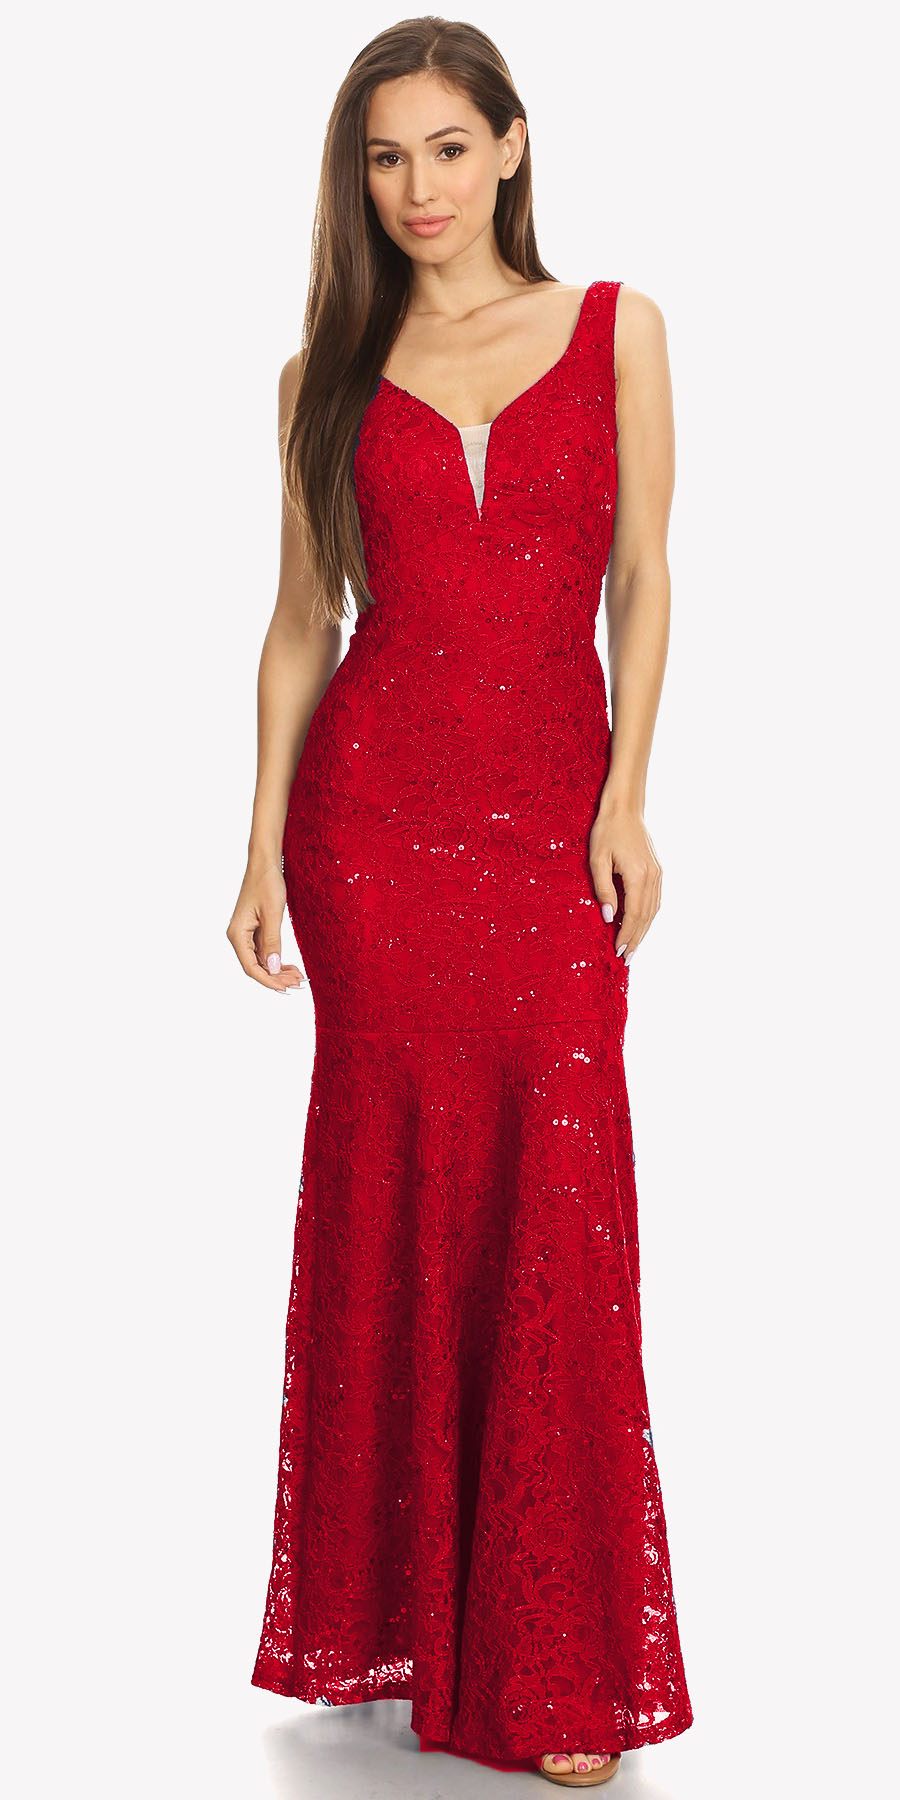 Lace Mermaid Evening Gown V-Neck with Mesh Panel Red